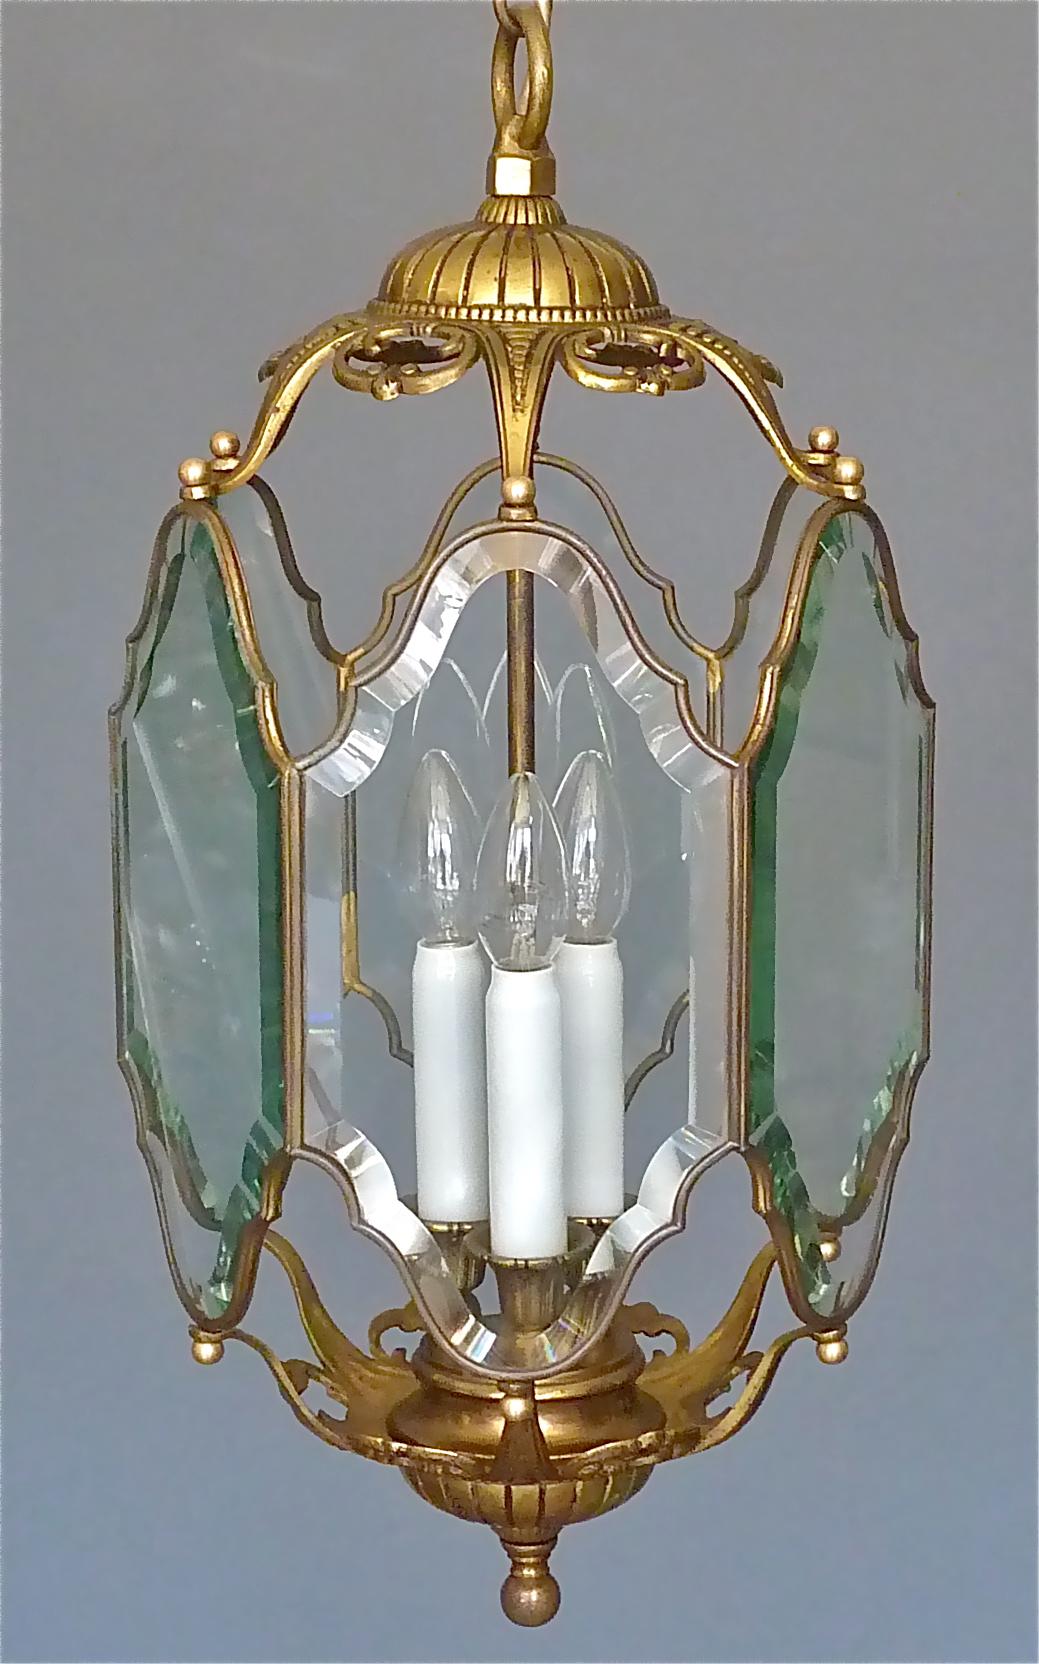 Large Antique French Lantern Lamp Faceted Crystal Glass Bronze Brass 1880 - 1900 For Sale 7